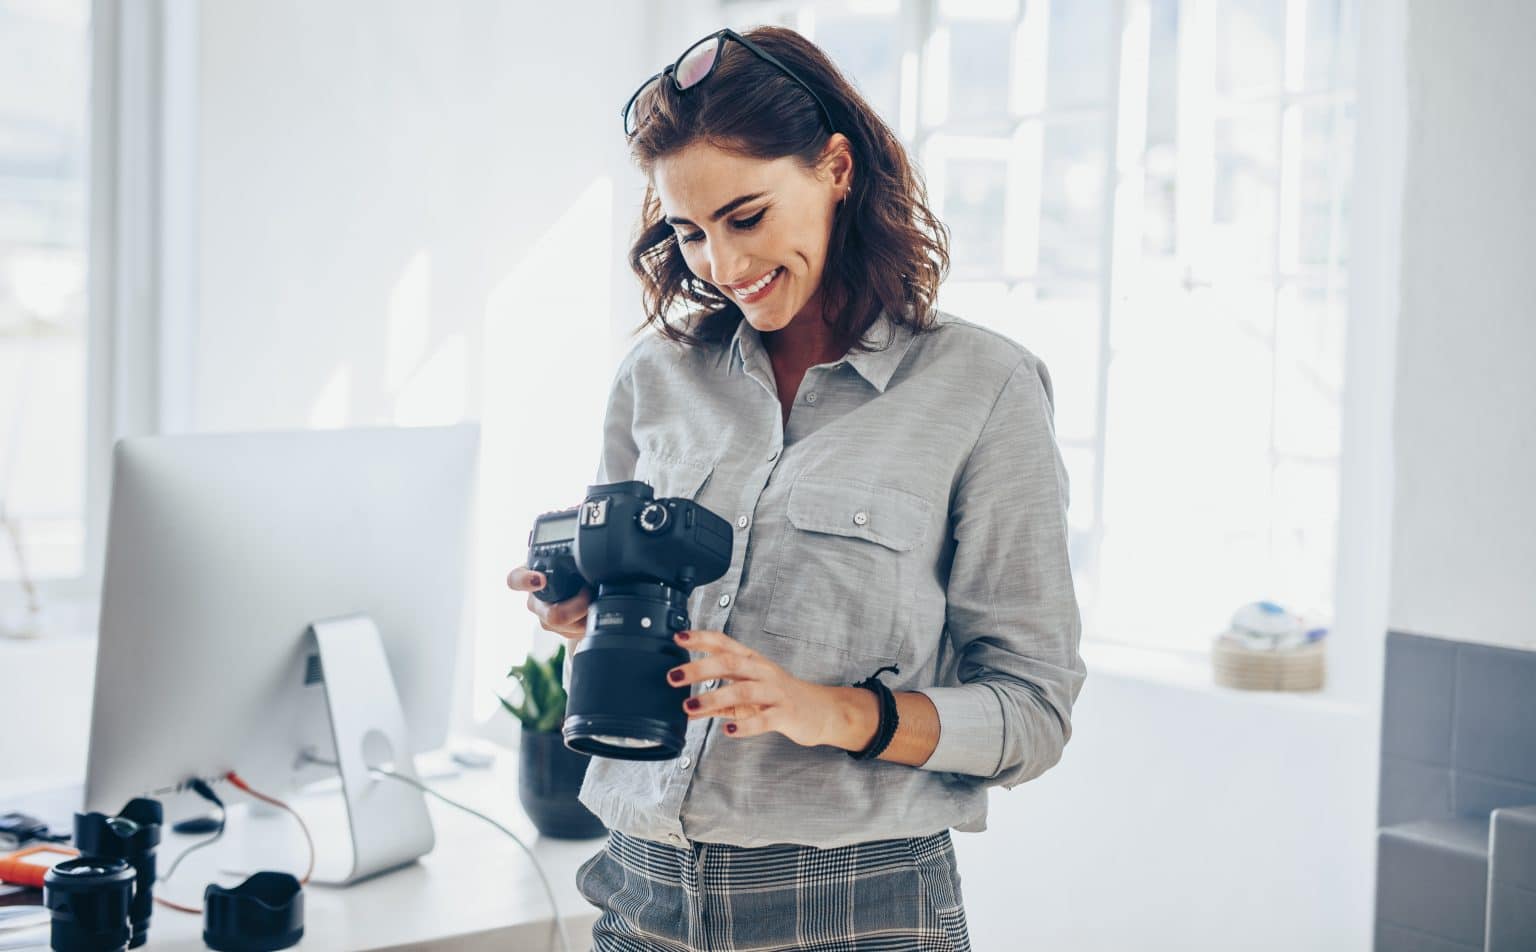 Female photographer checking pictures on camera and smiling. Caucasian woman in casuals standing in her office looking at the photos on her dslr camera.